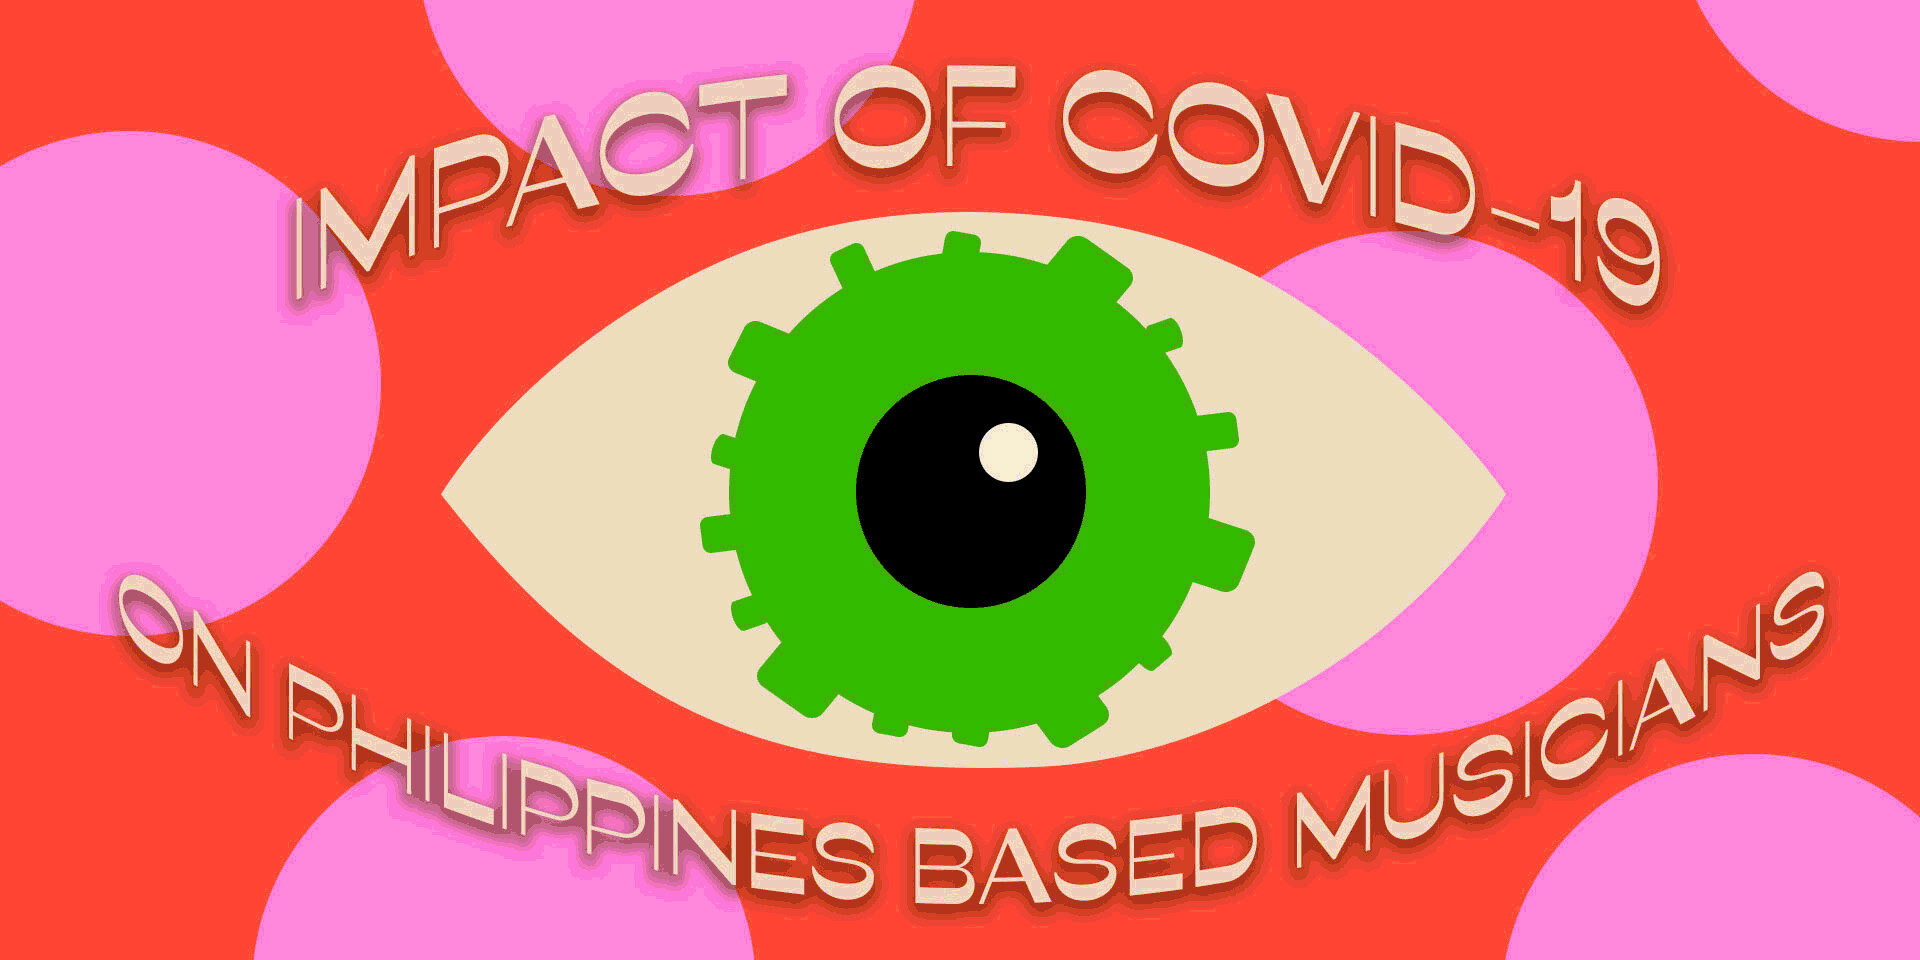 Understanding the impact of COVID-19 on Philippine-based musicians